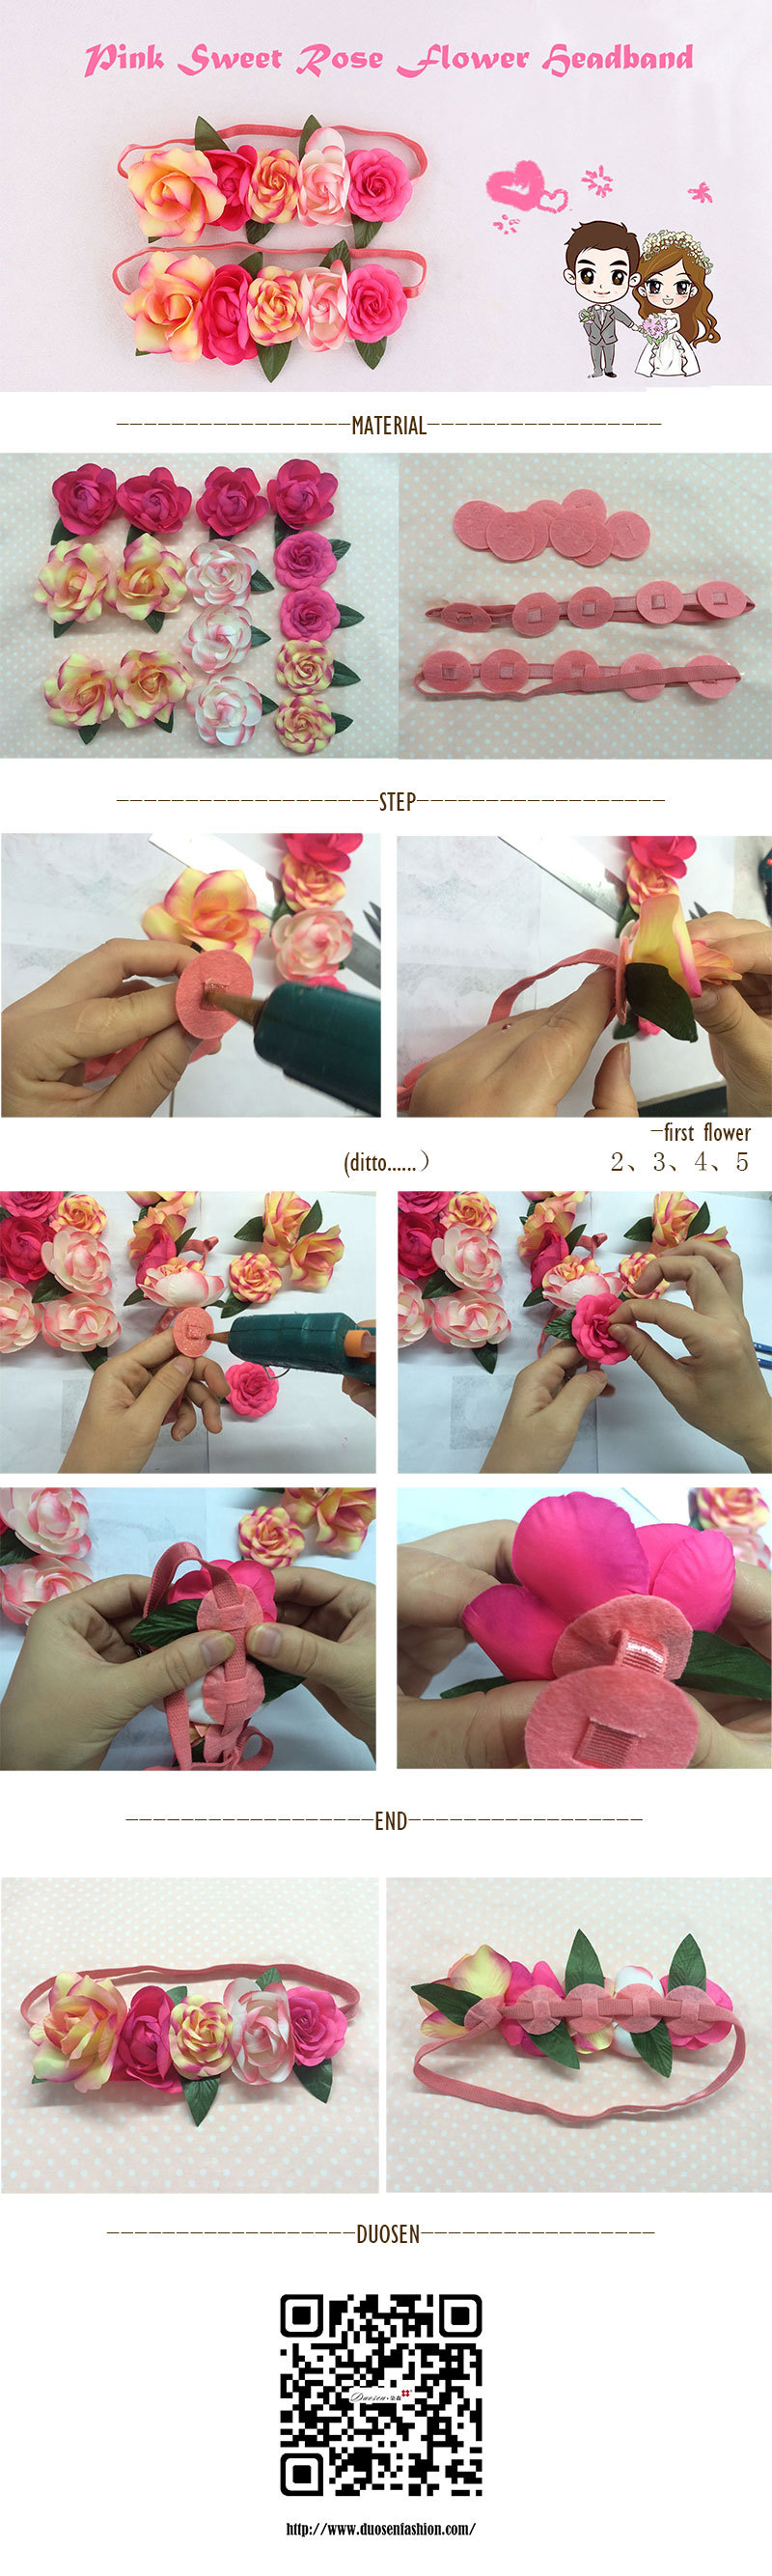 one minute tutorial about how to make sweet rose flower headband quickly